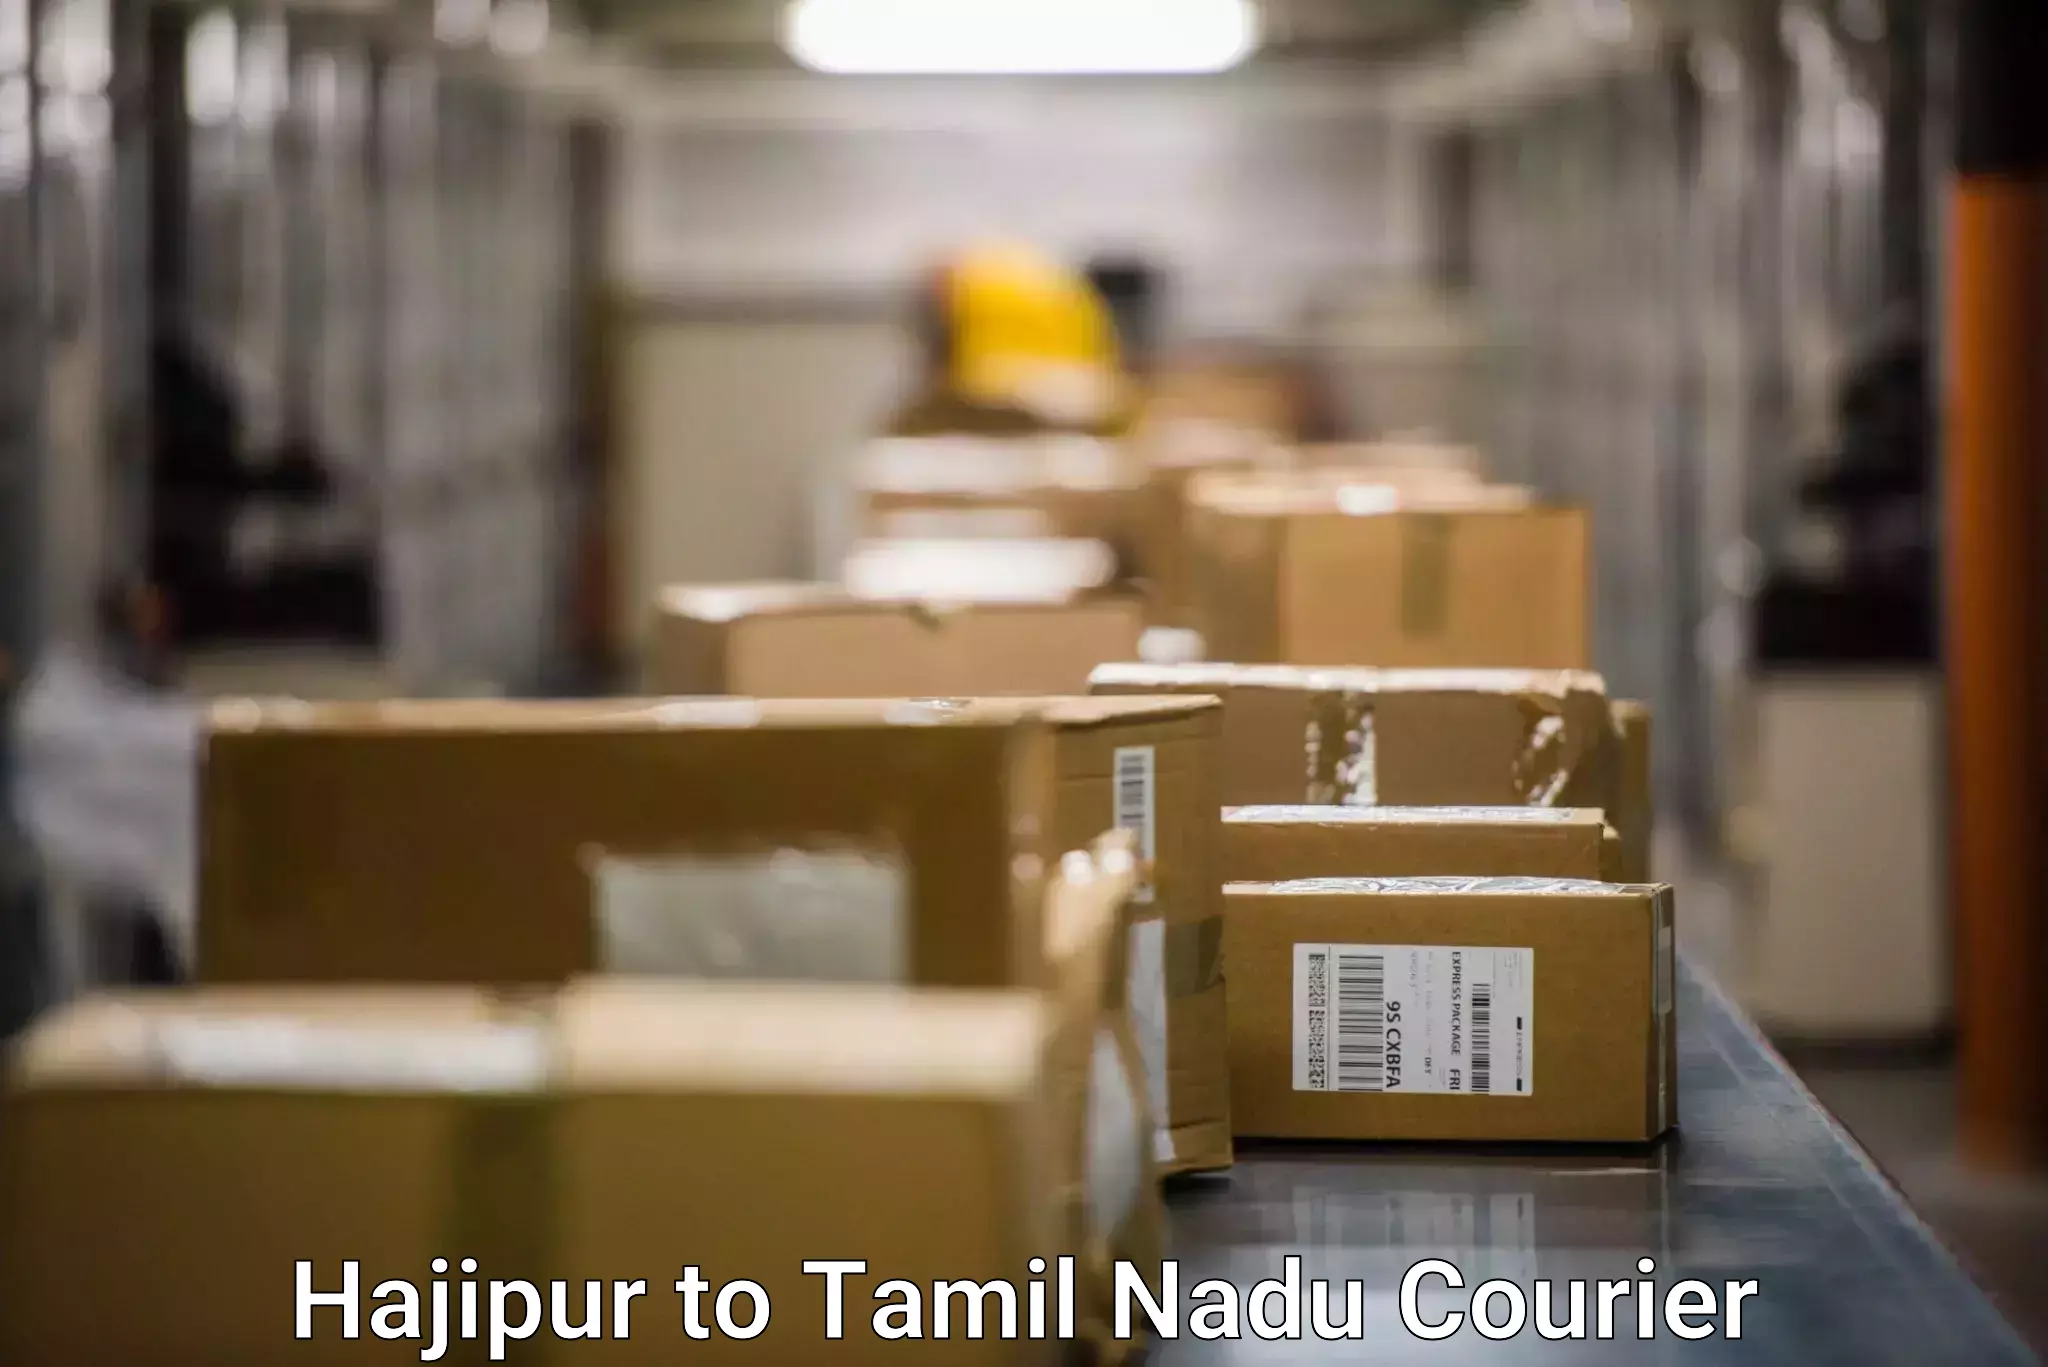 Global shipping networks in Hajipur to Cuddalore